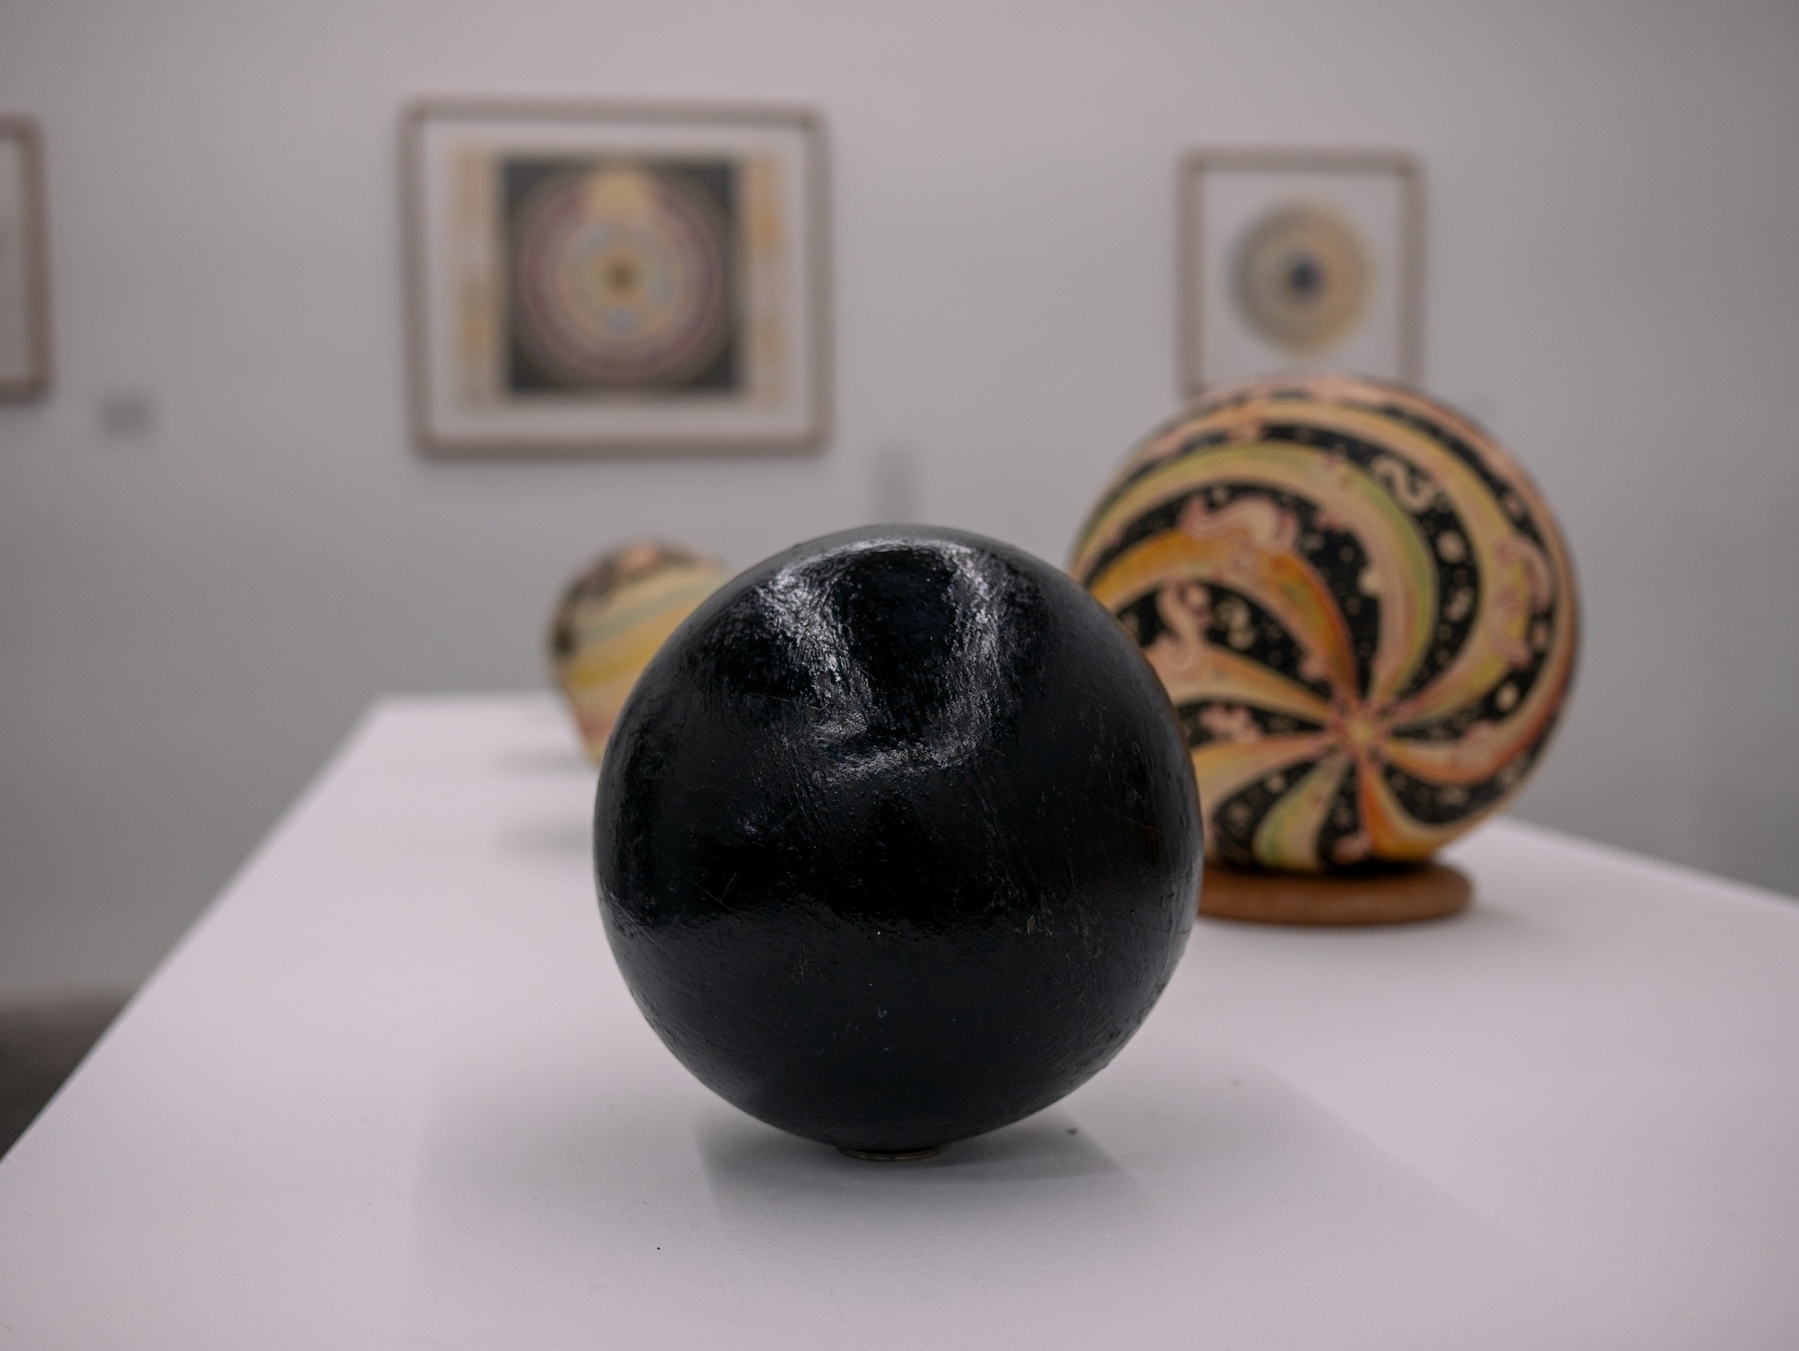 A series of painted spheres, with the one in the foreground painted solid black